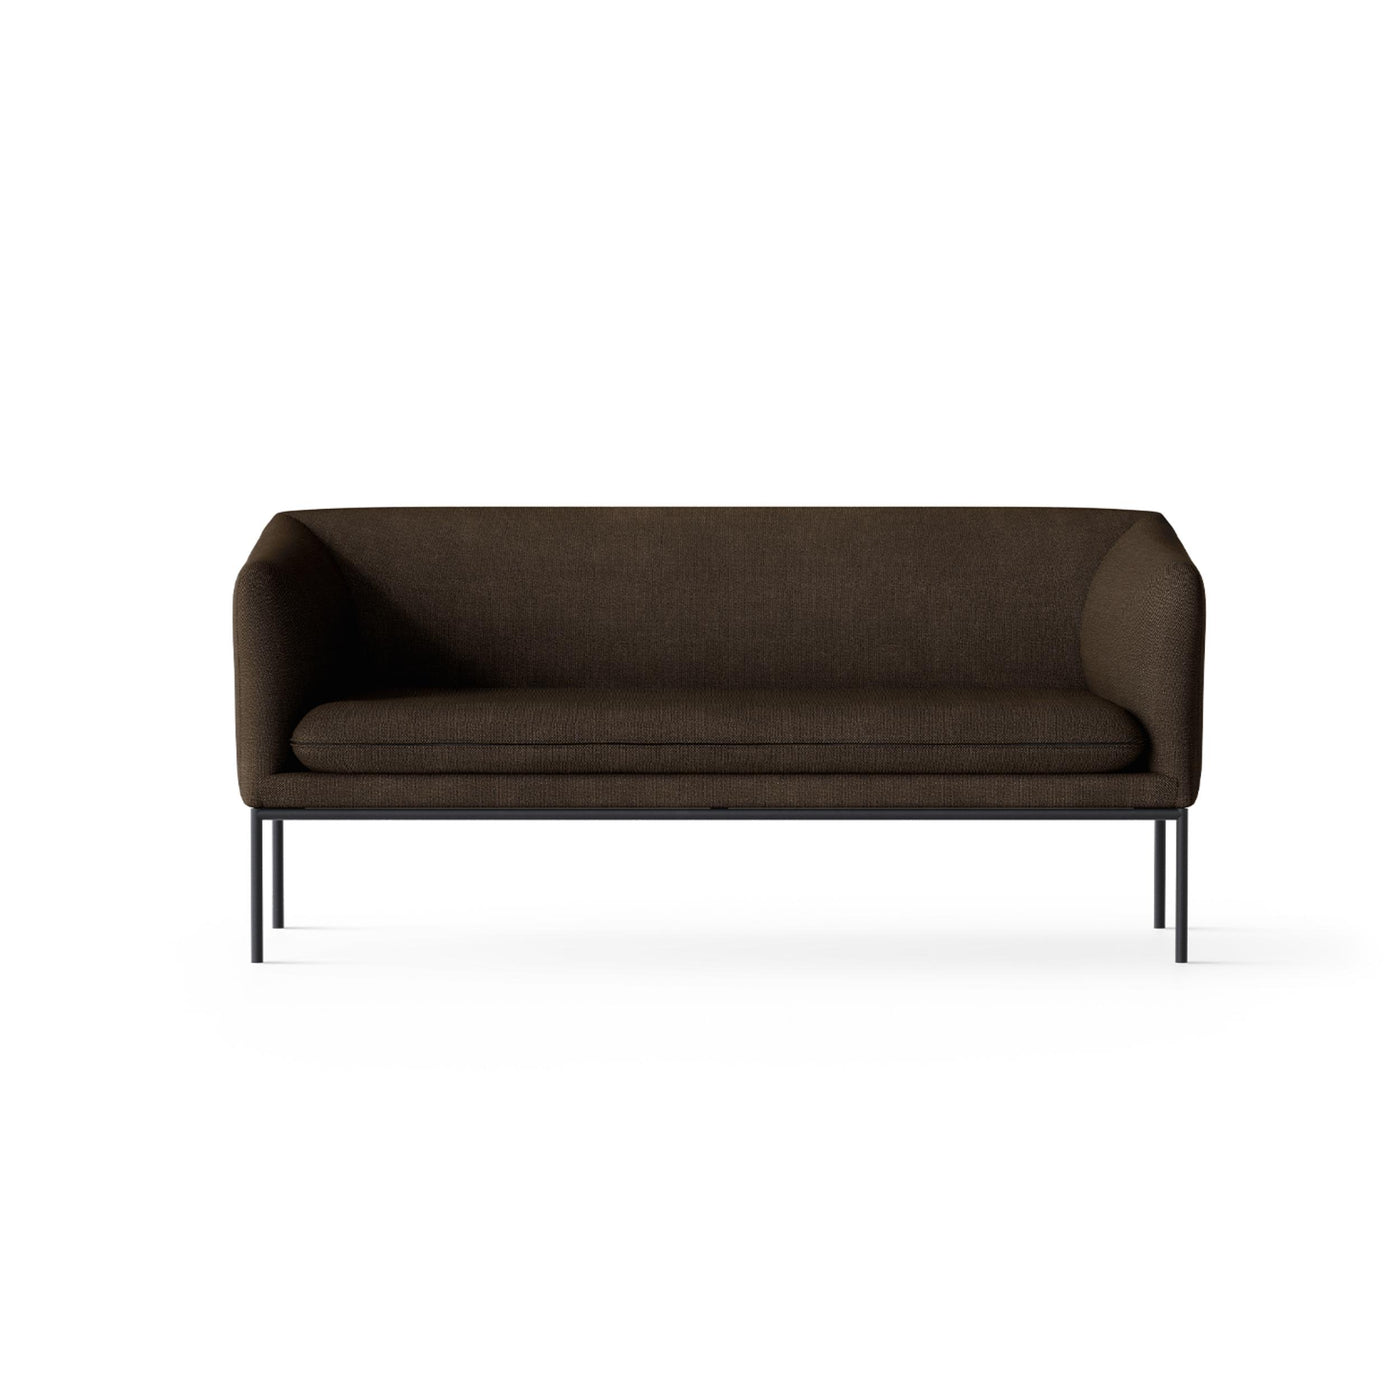 Ferm Living Turn 2 Seater sofa with black frame. Made to order from someday designs. #colour_hallingdal-370